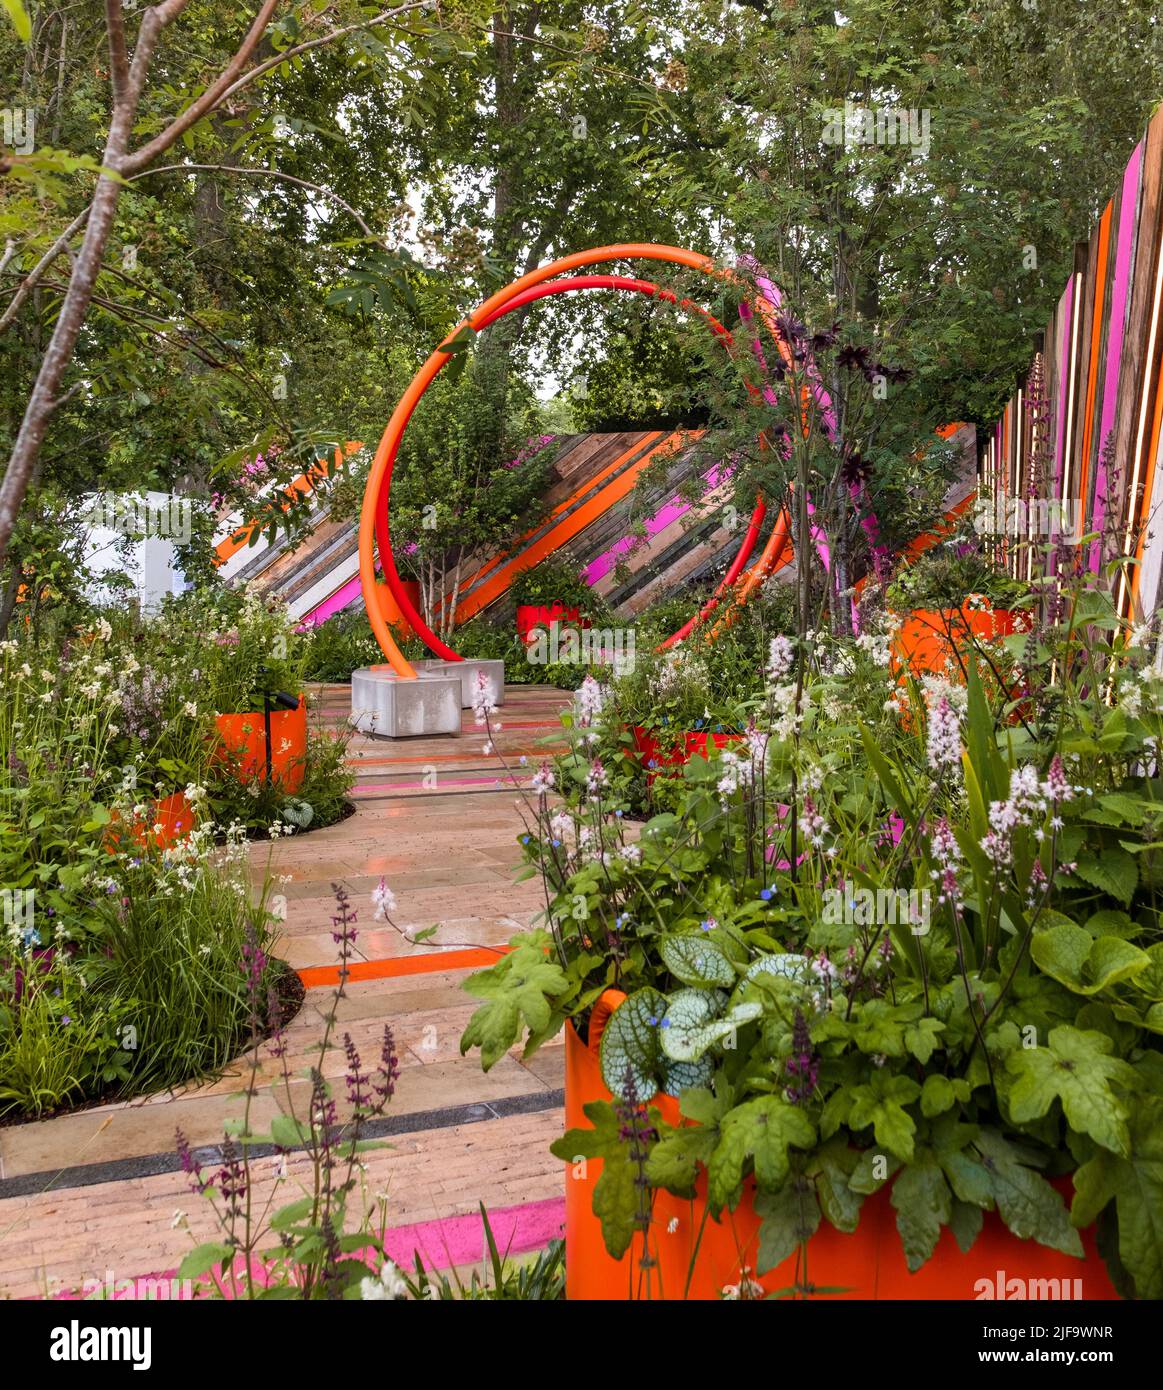 The St Mungo's Putting Down Roots Garden at the Chelsea Flower Show 2022, London.  Designed by Cityscapes Darryl Moore and Adolfo Harrison. Stock Photo